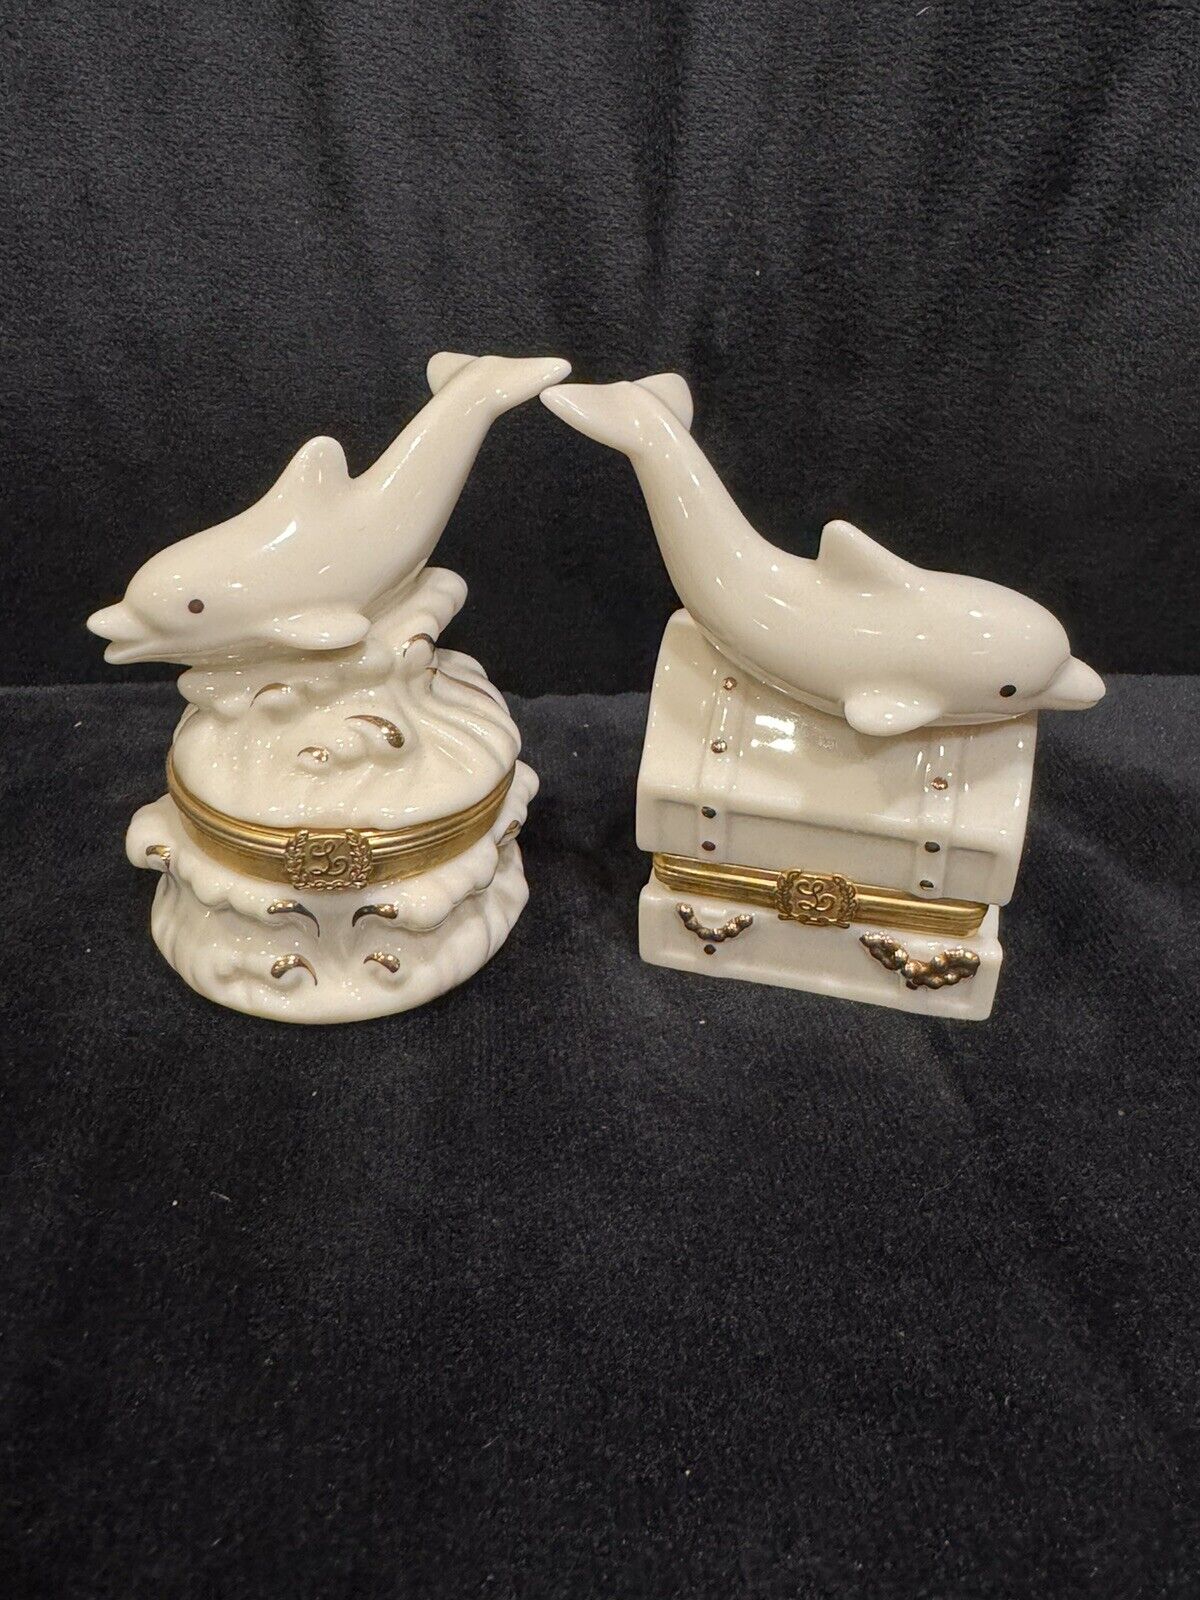 VINTAGE LENOX TREASURES Dolphins 22kt Gold -2 SEASCAPE BOXES WITH CHARMS